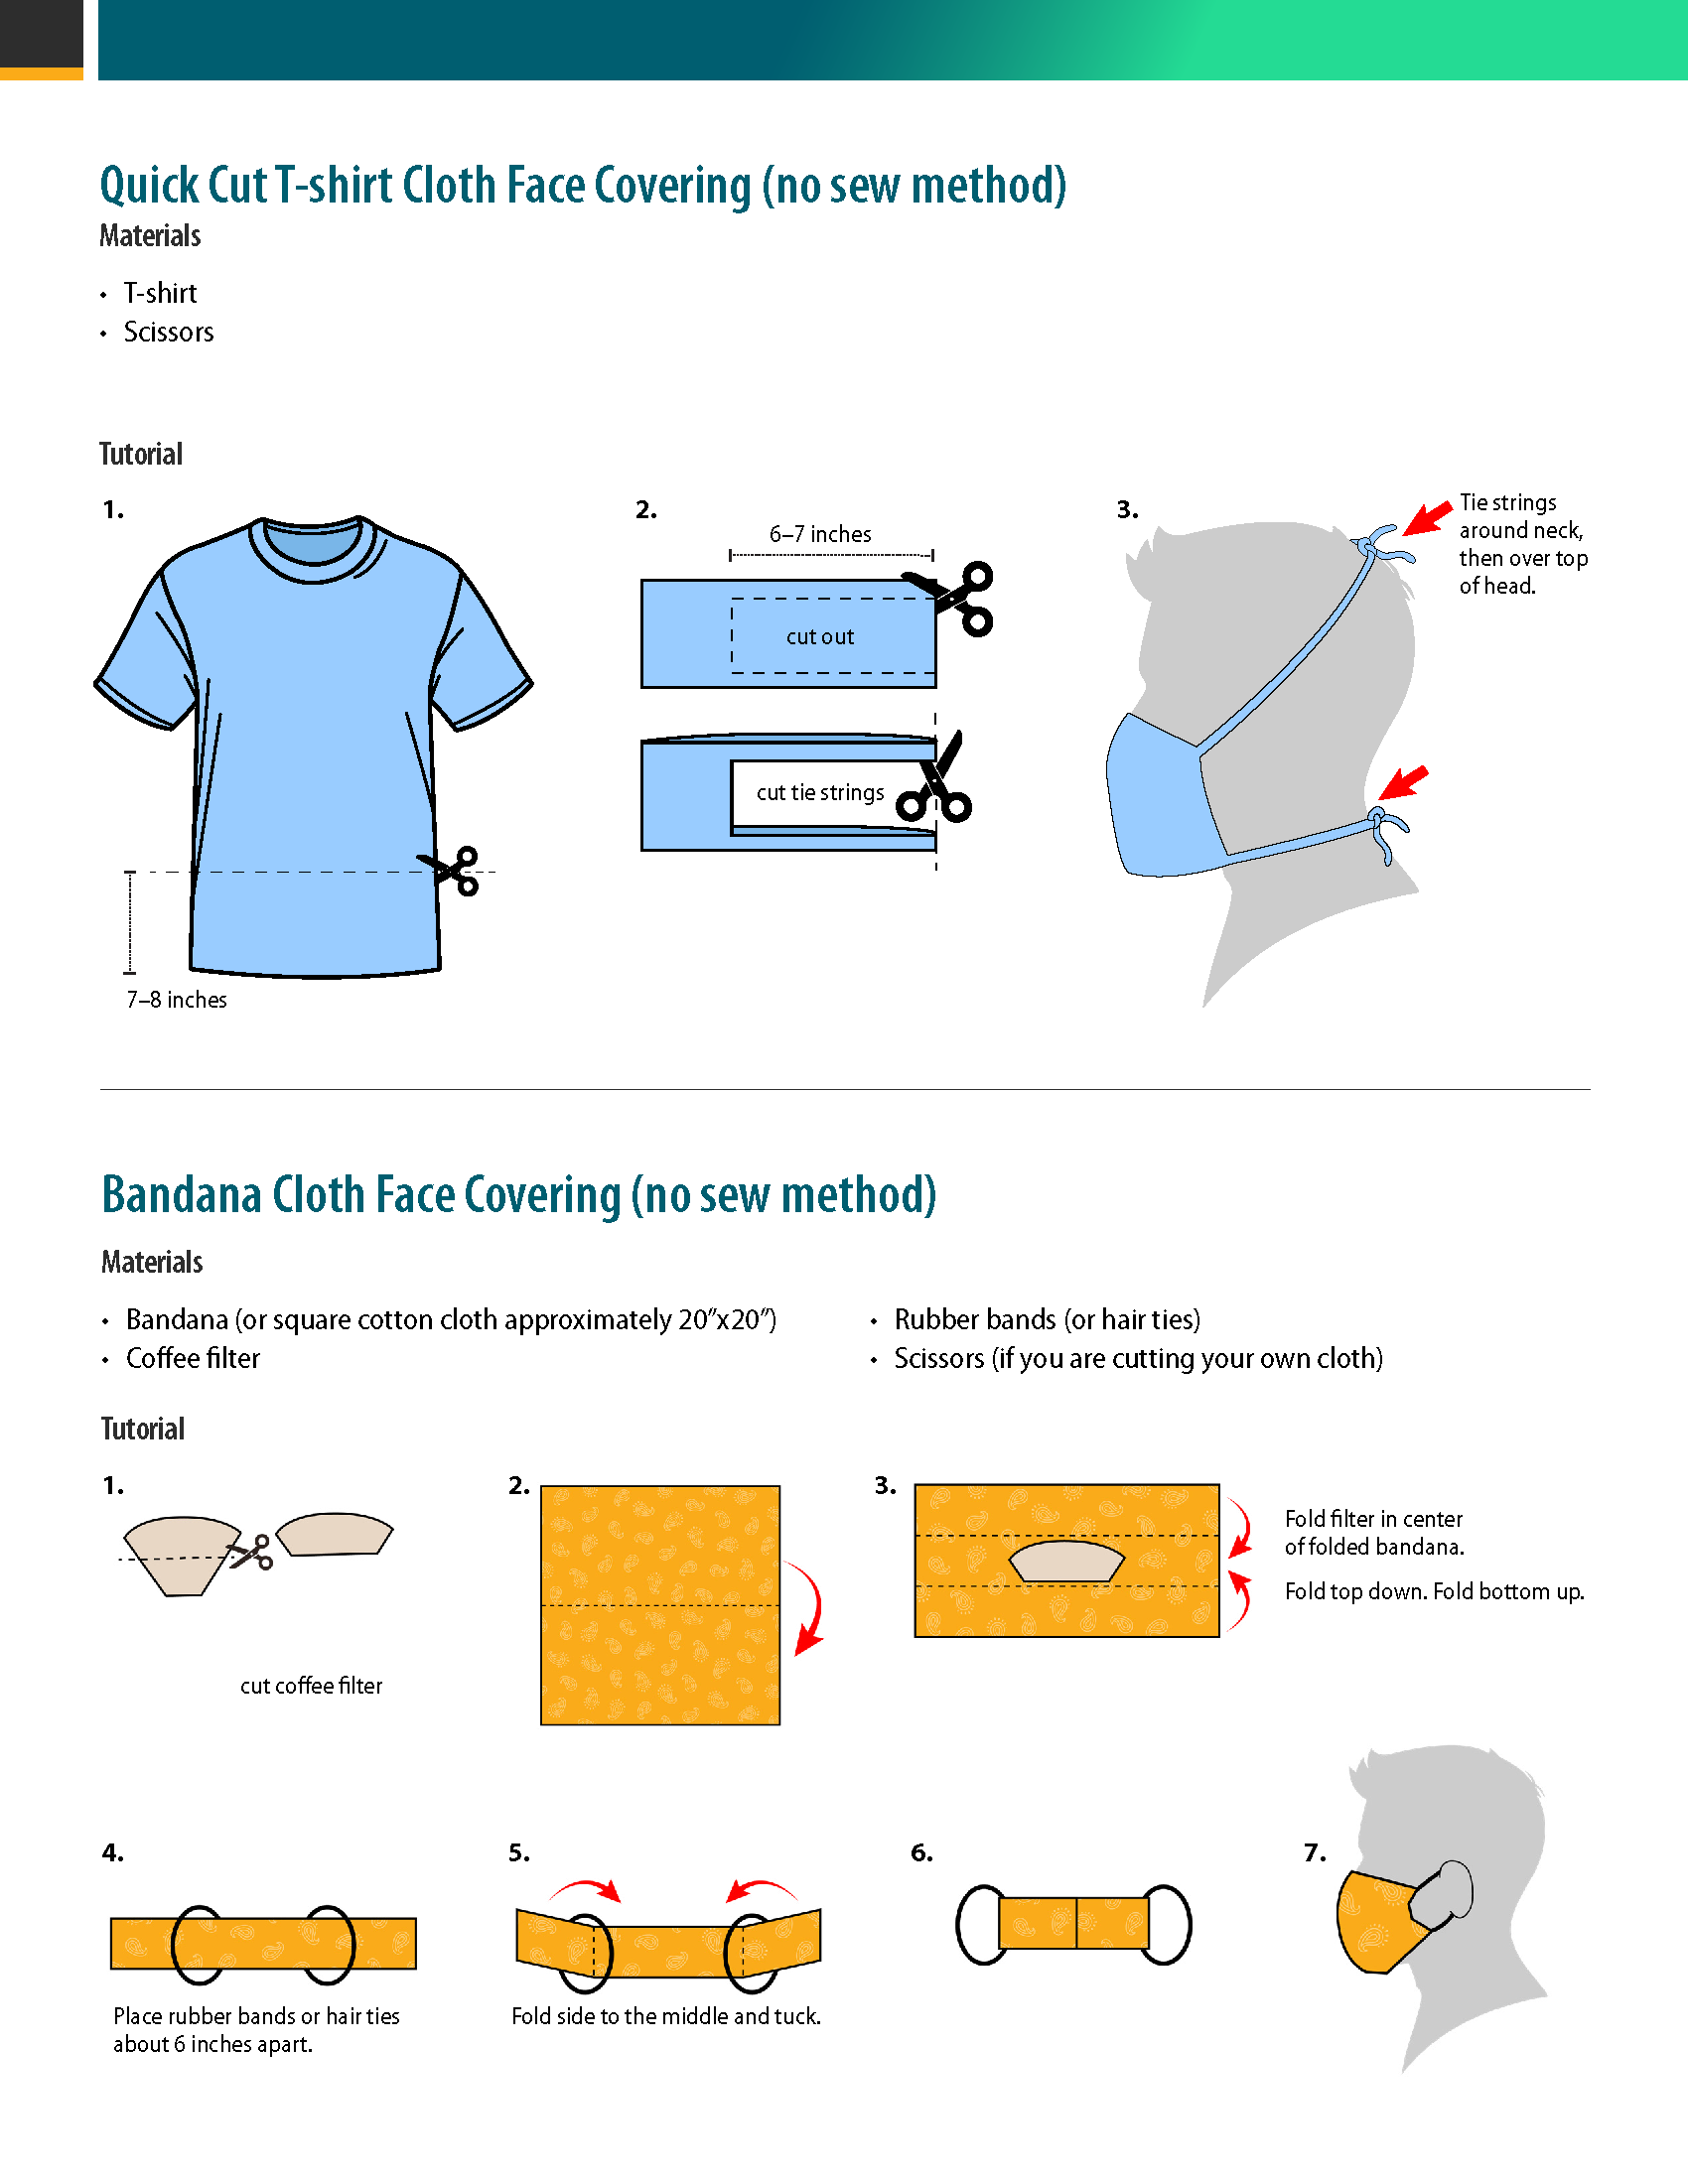 T-shirt cloth face covering (no sew method) instructions